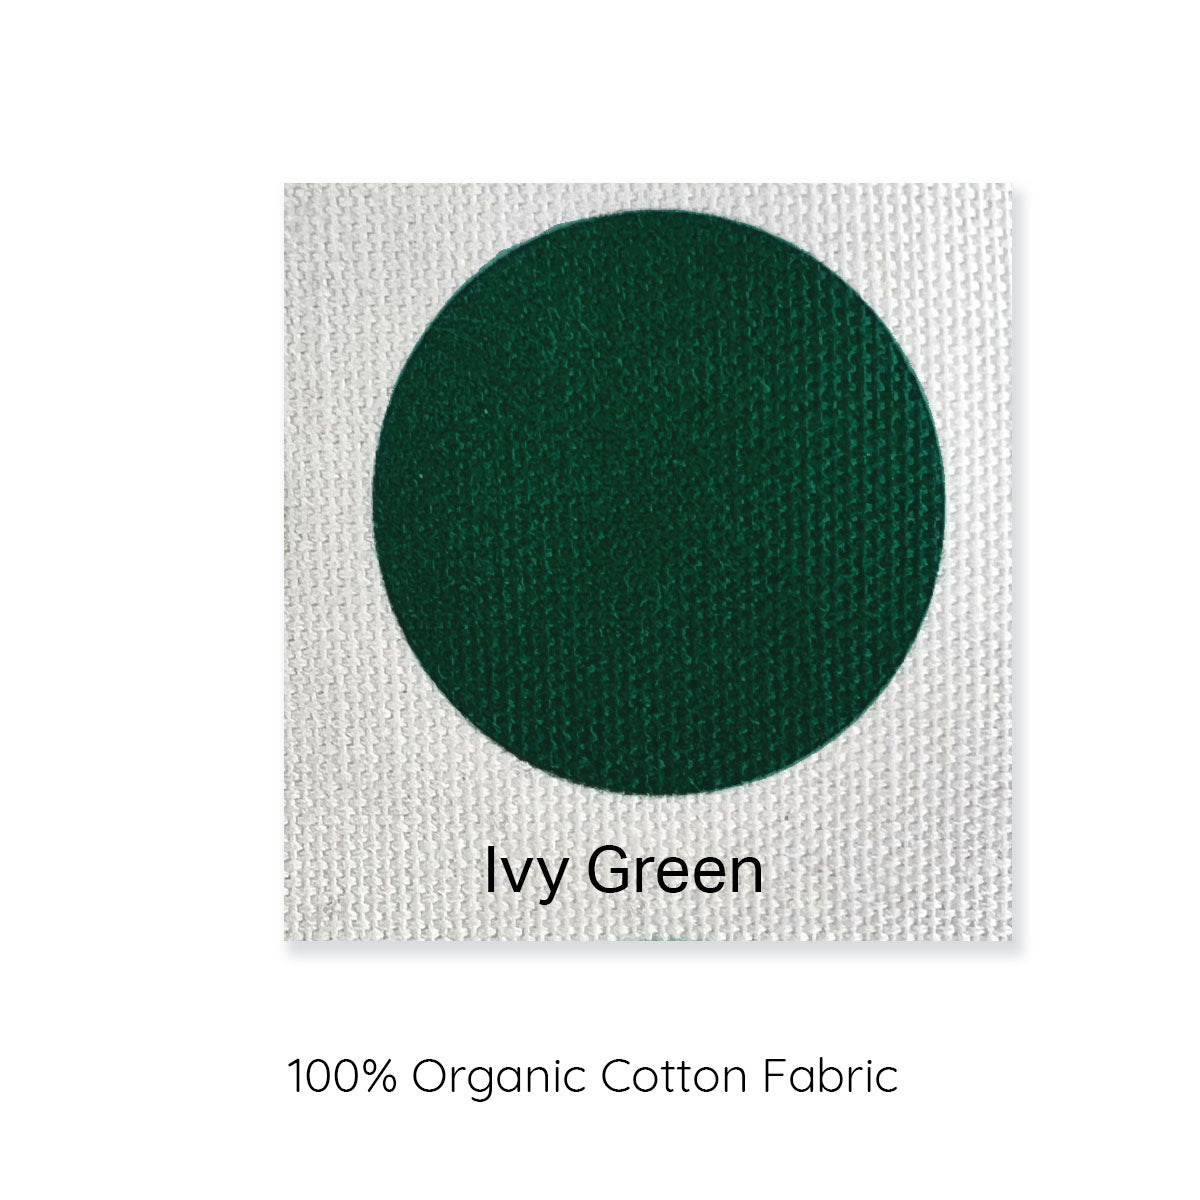 ivy green cushion cover, colour swatch.